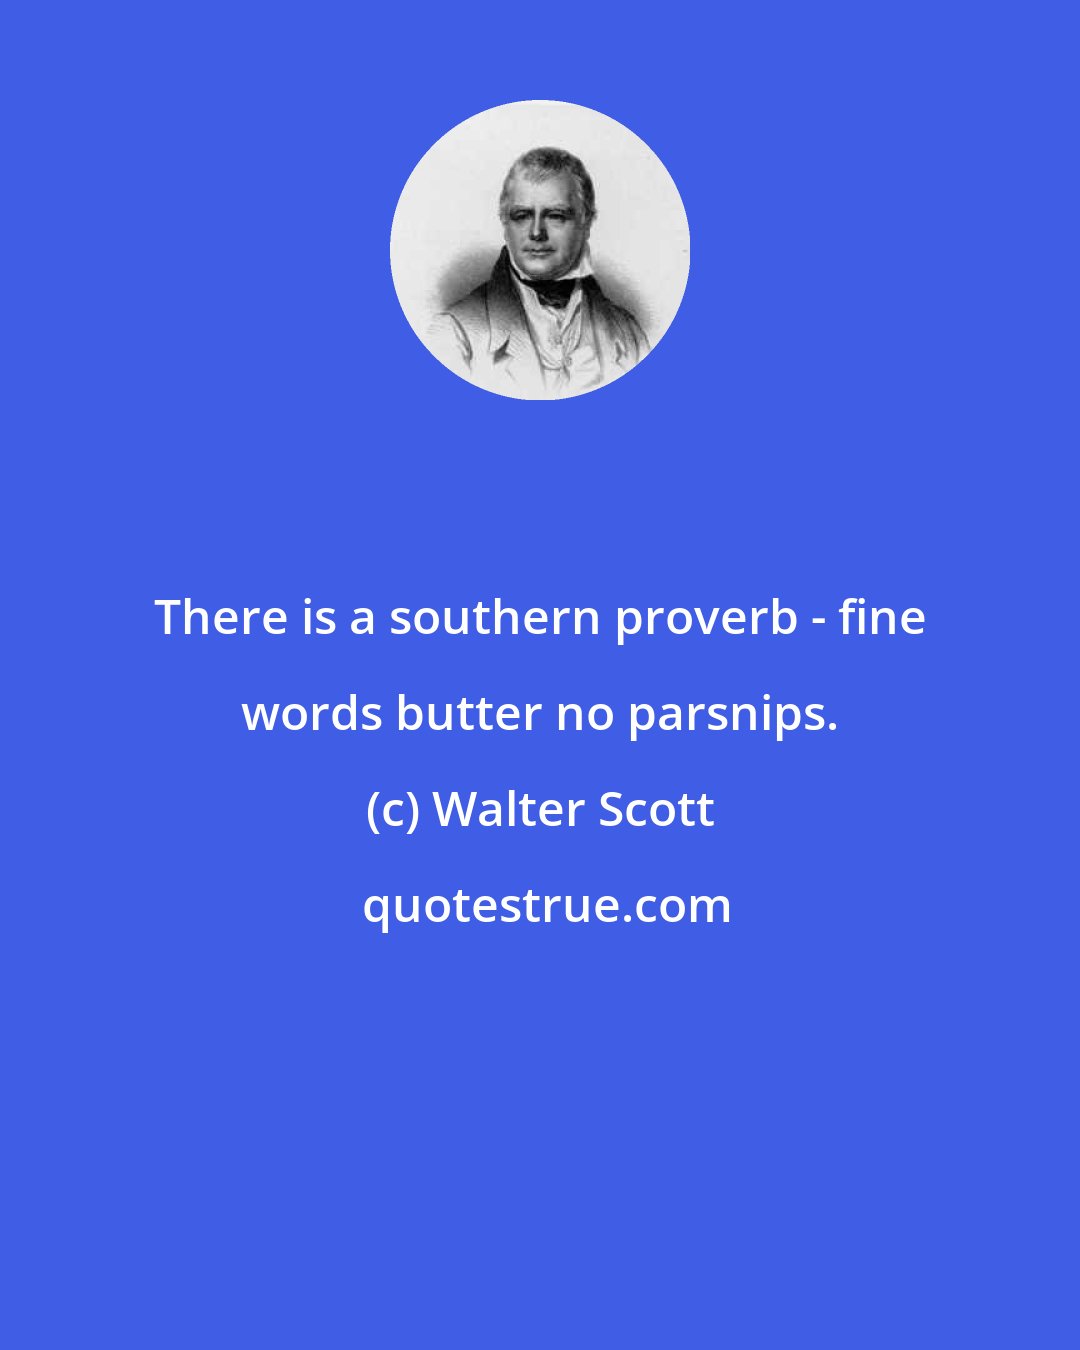 Walter Scott: There is a southern proverb - fine words butter no parsnips.